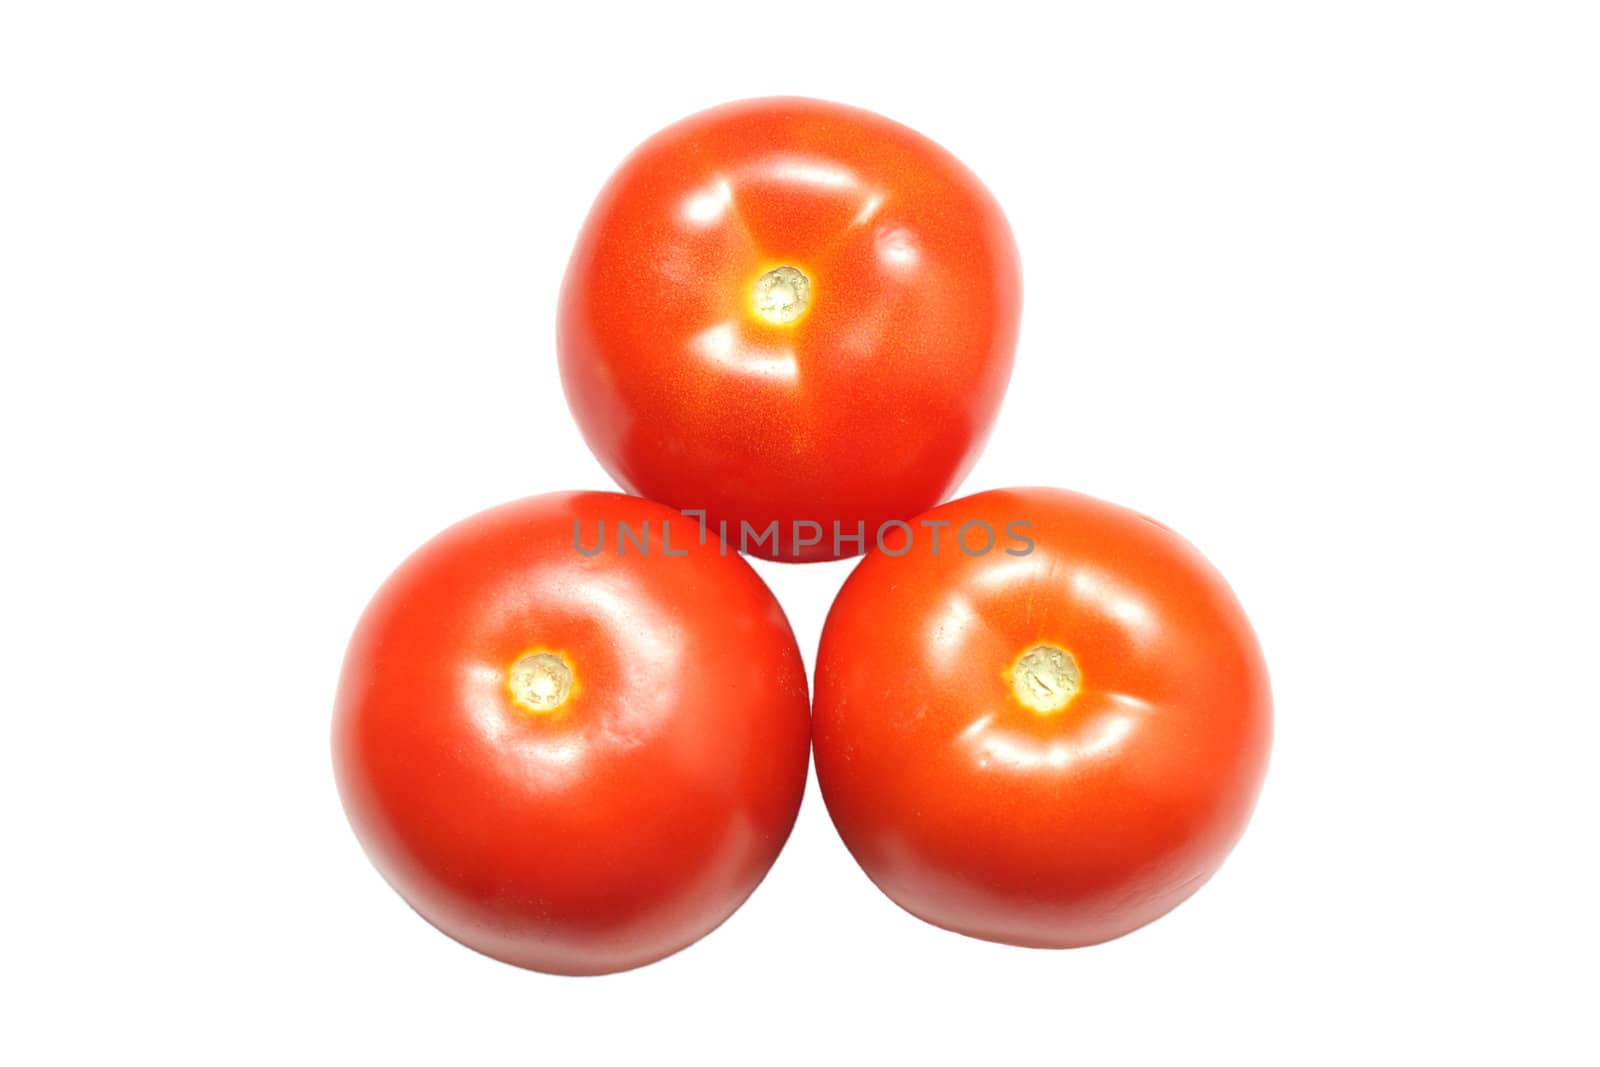 Three ripe tomatoes isolated on white by pulen